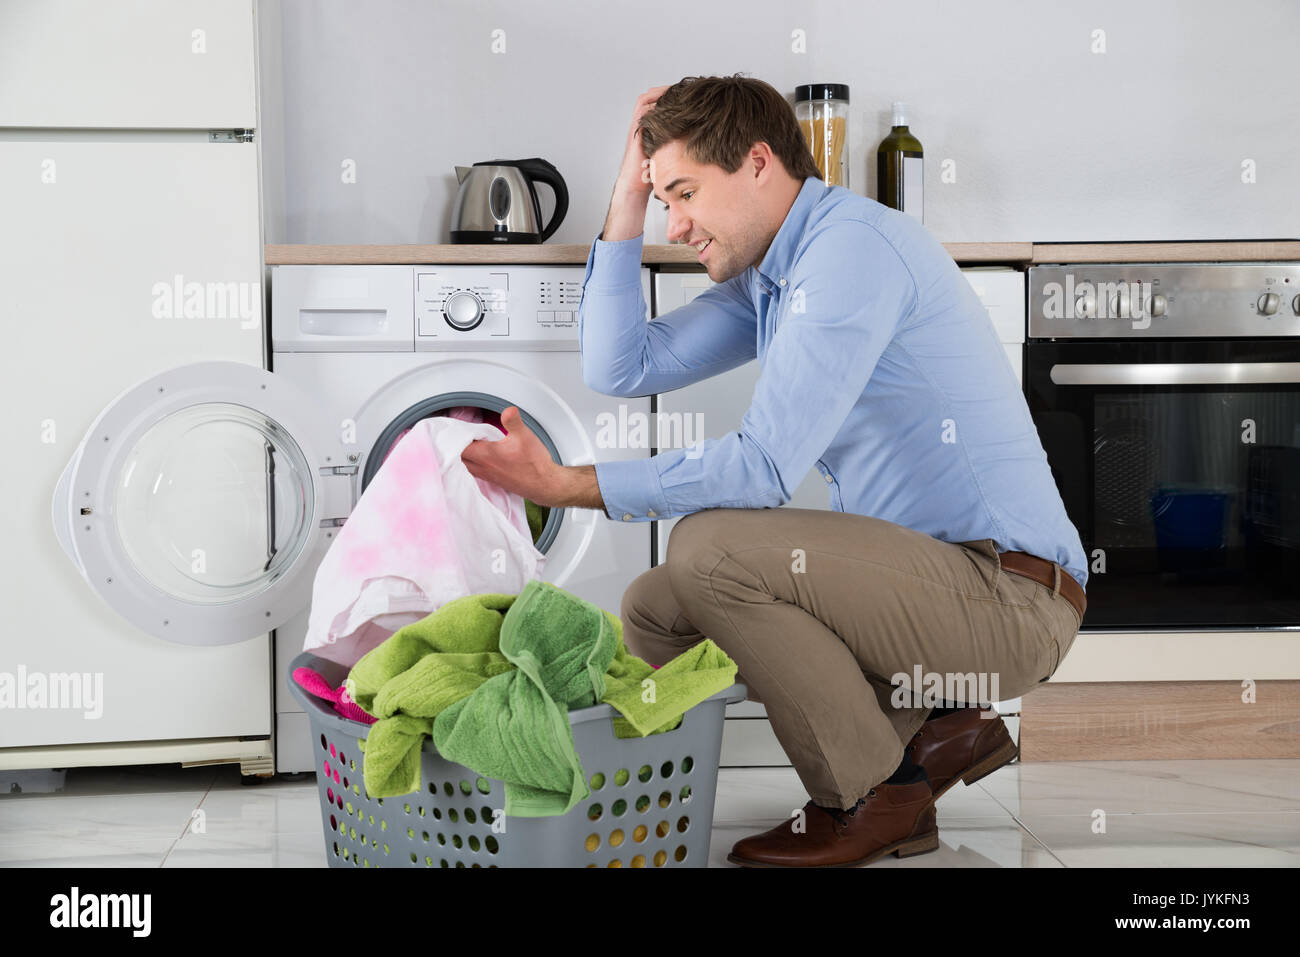 Man Near The Washing Machine With Laundry Basket Holding Stained Cloth In Kitchen Stock Photo